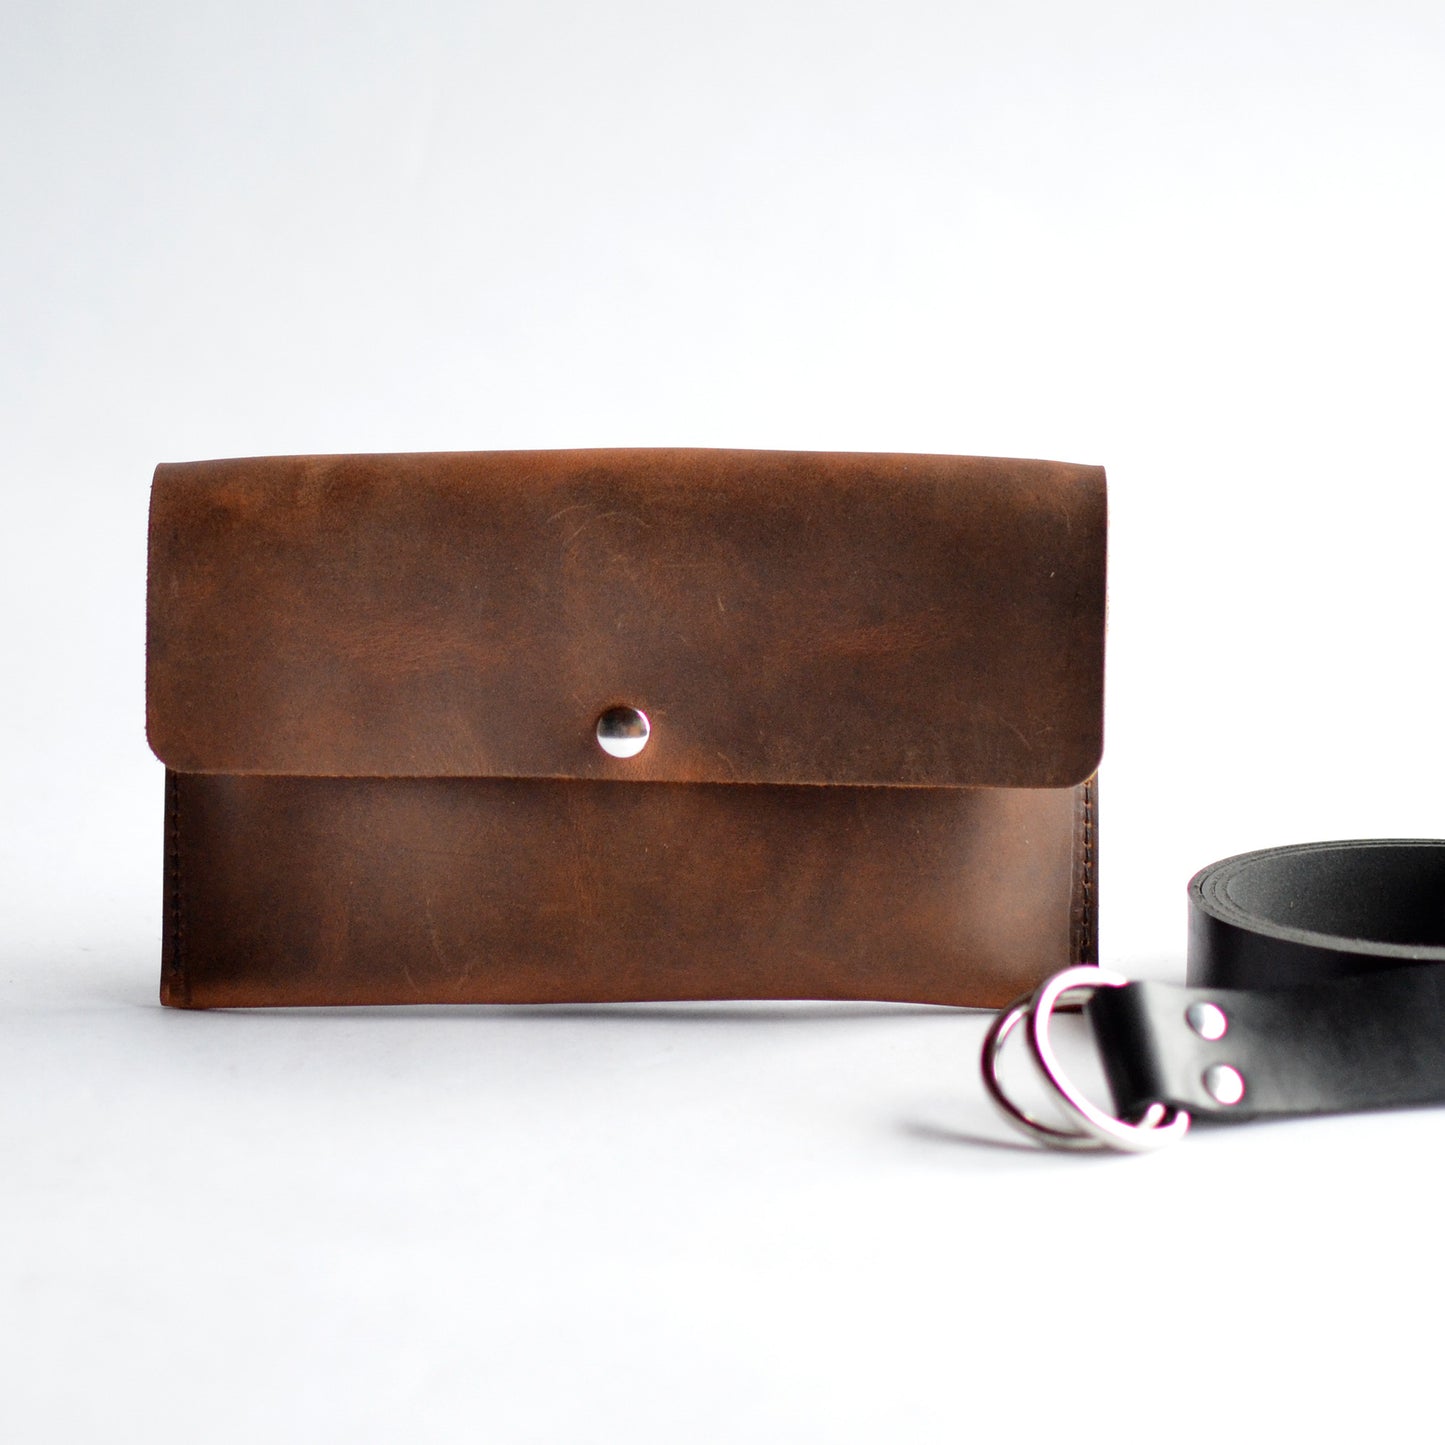 LIMITED EDITION Hipster Fanny Pack - rustic brown leather